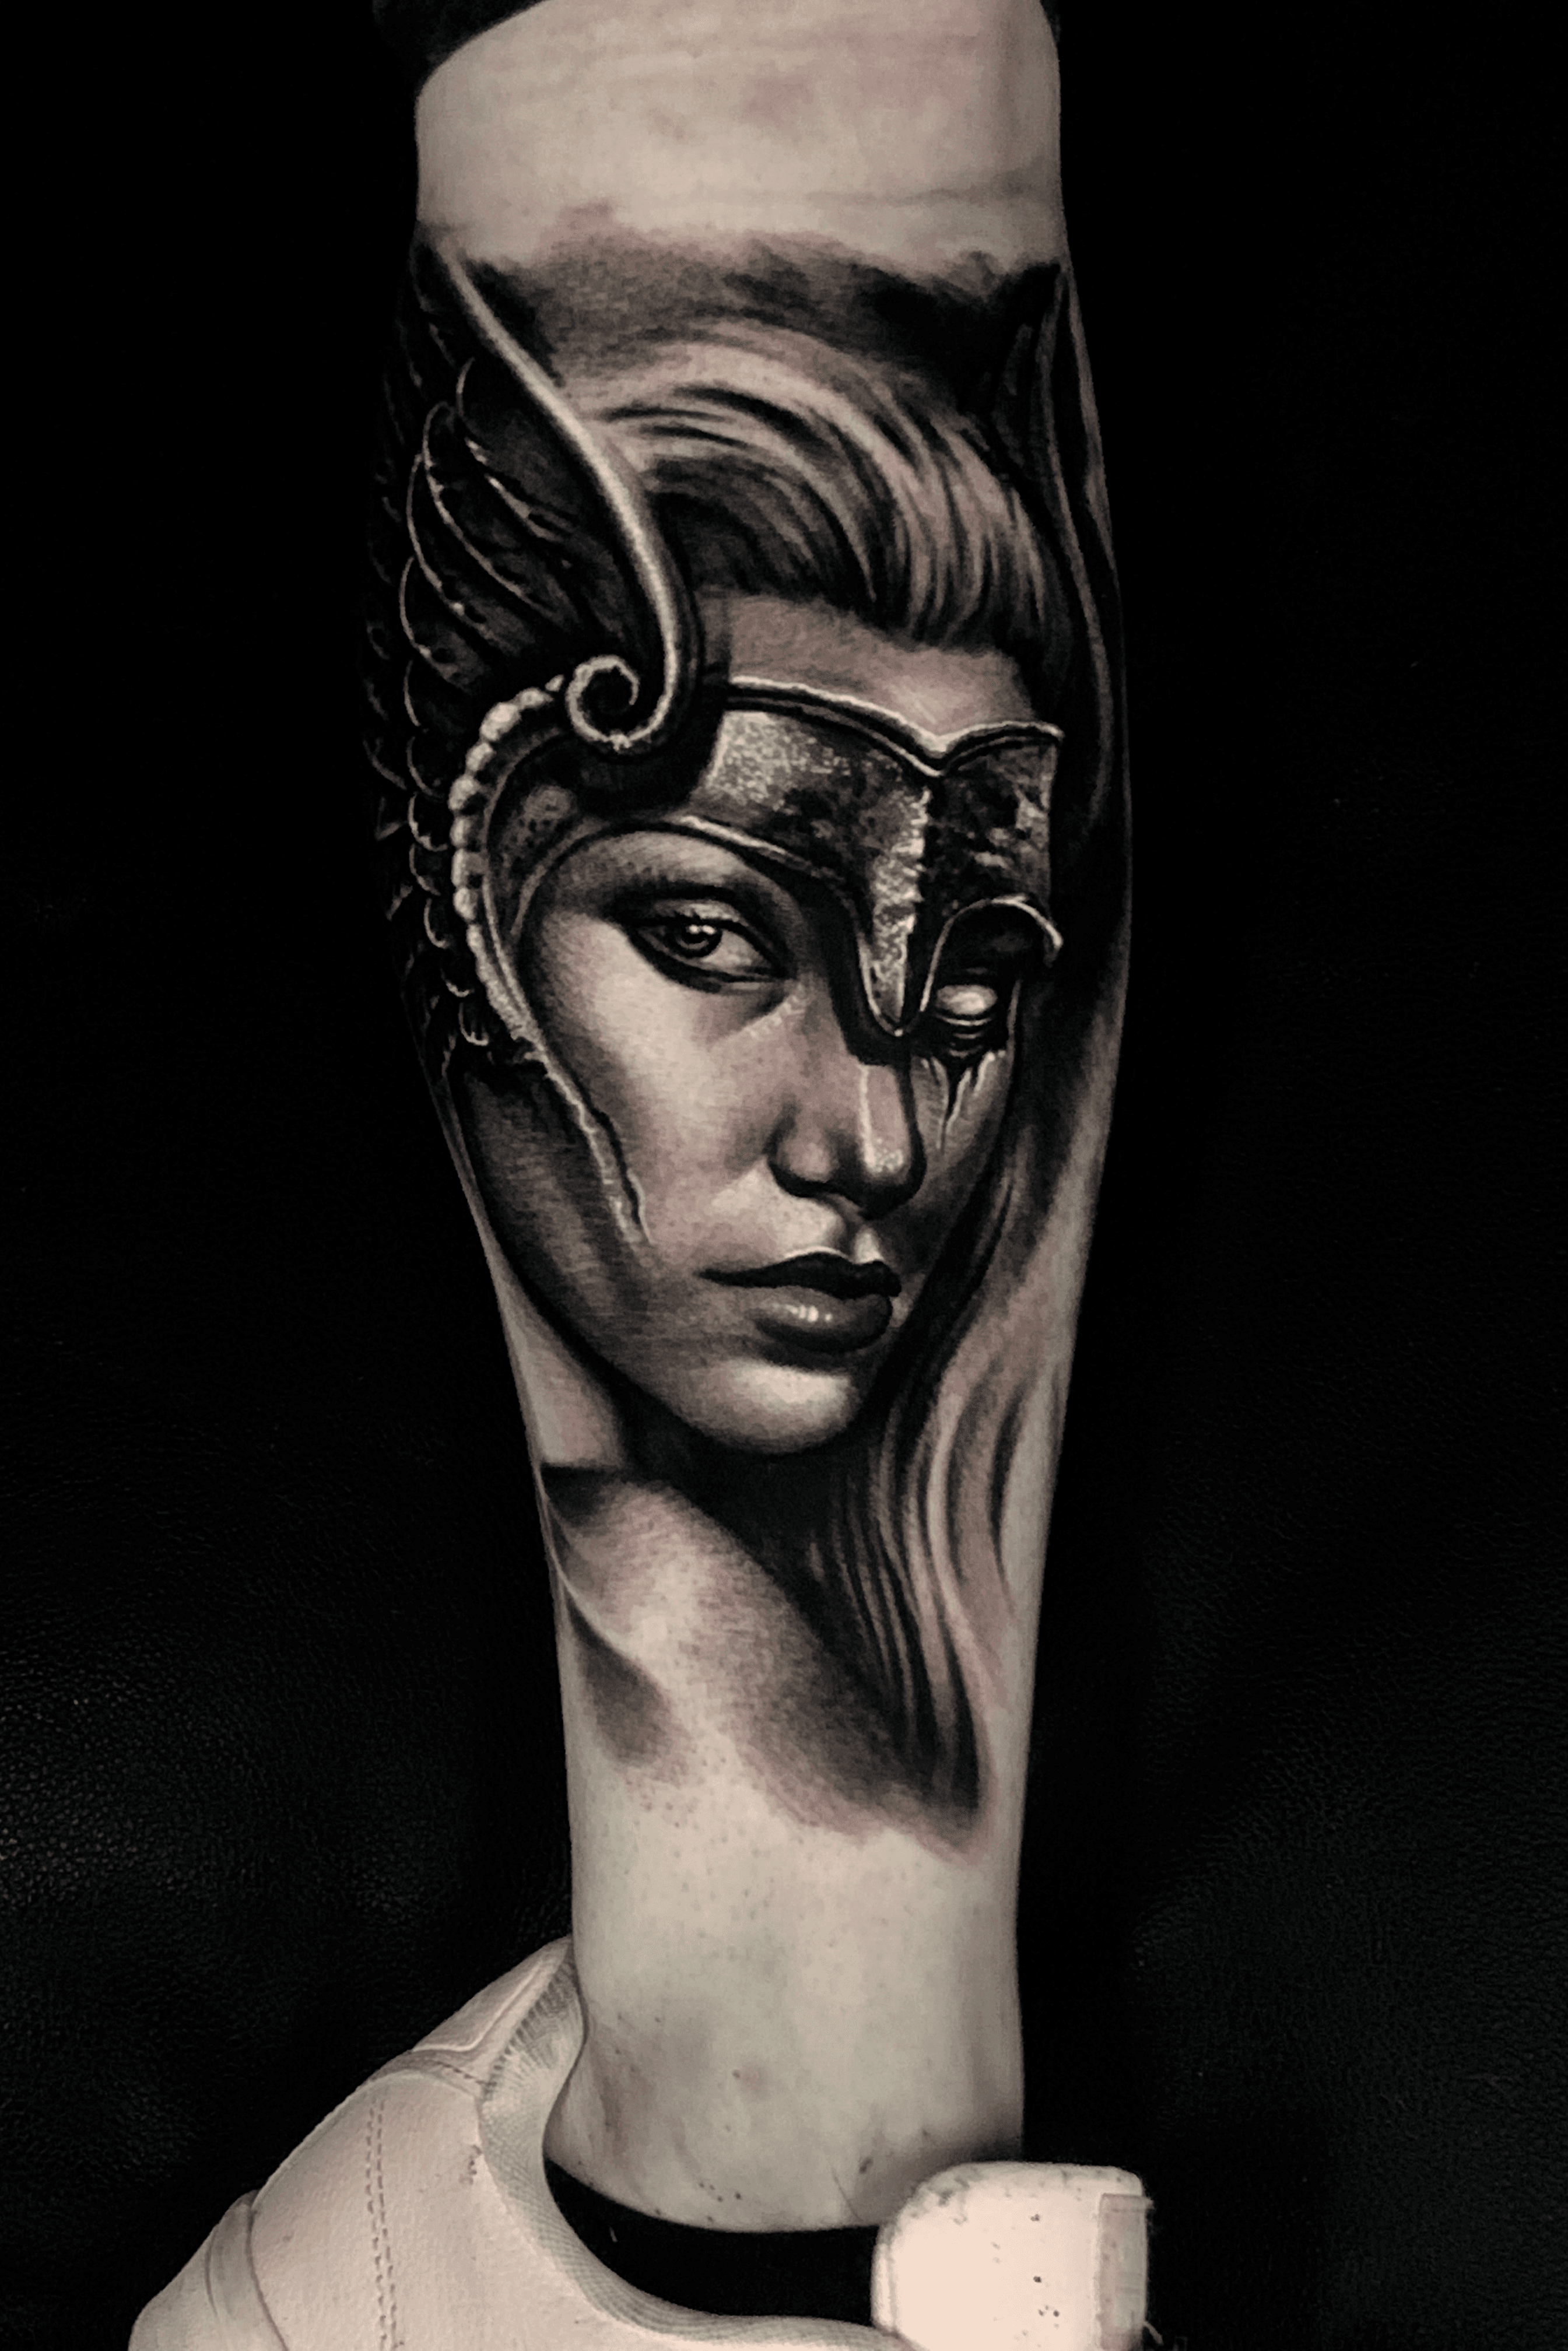 The Best Viking Tattoos Featuring Odin Valkyrie Hel and Darwin Enriquez  Designs The Best Viking Tattoos Featuring Odin Valkyrie Hel and Darwin  Enriquez Designs  Darwin Enriquez  Best Tattoo Artist in NYC